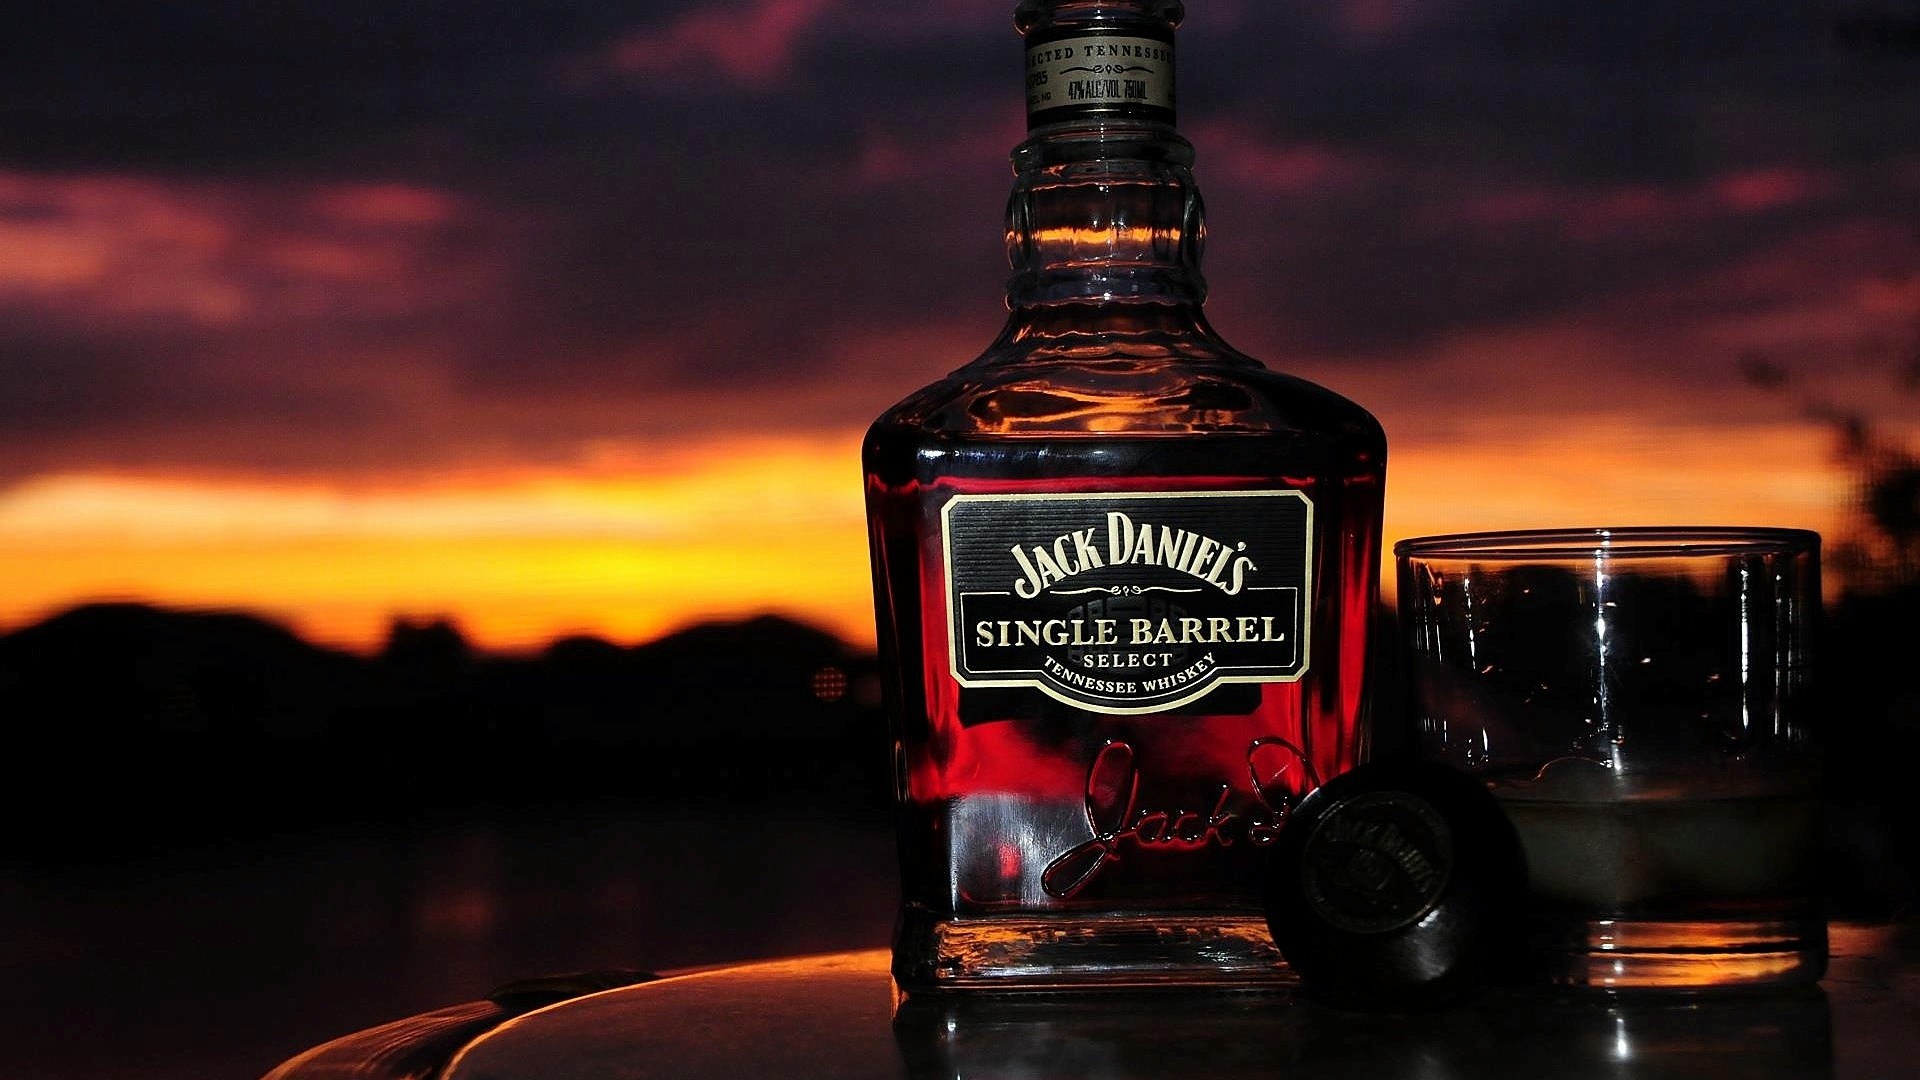 Jack daniels whiskey glass drink alcohol 93870 1920×1080 19201080 WALLPAPERS Pinterest Jack daniels, Jack daniels whiskey and Jack daniels